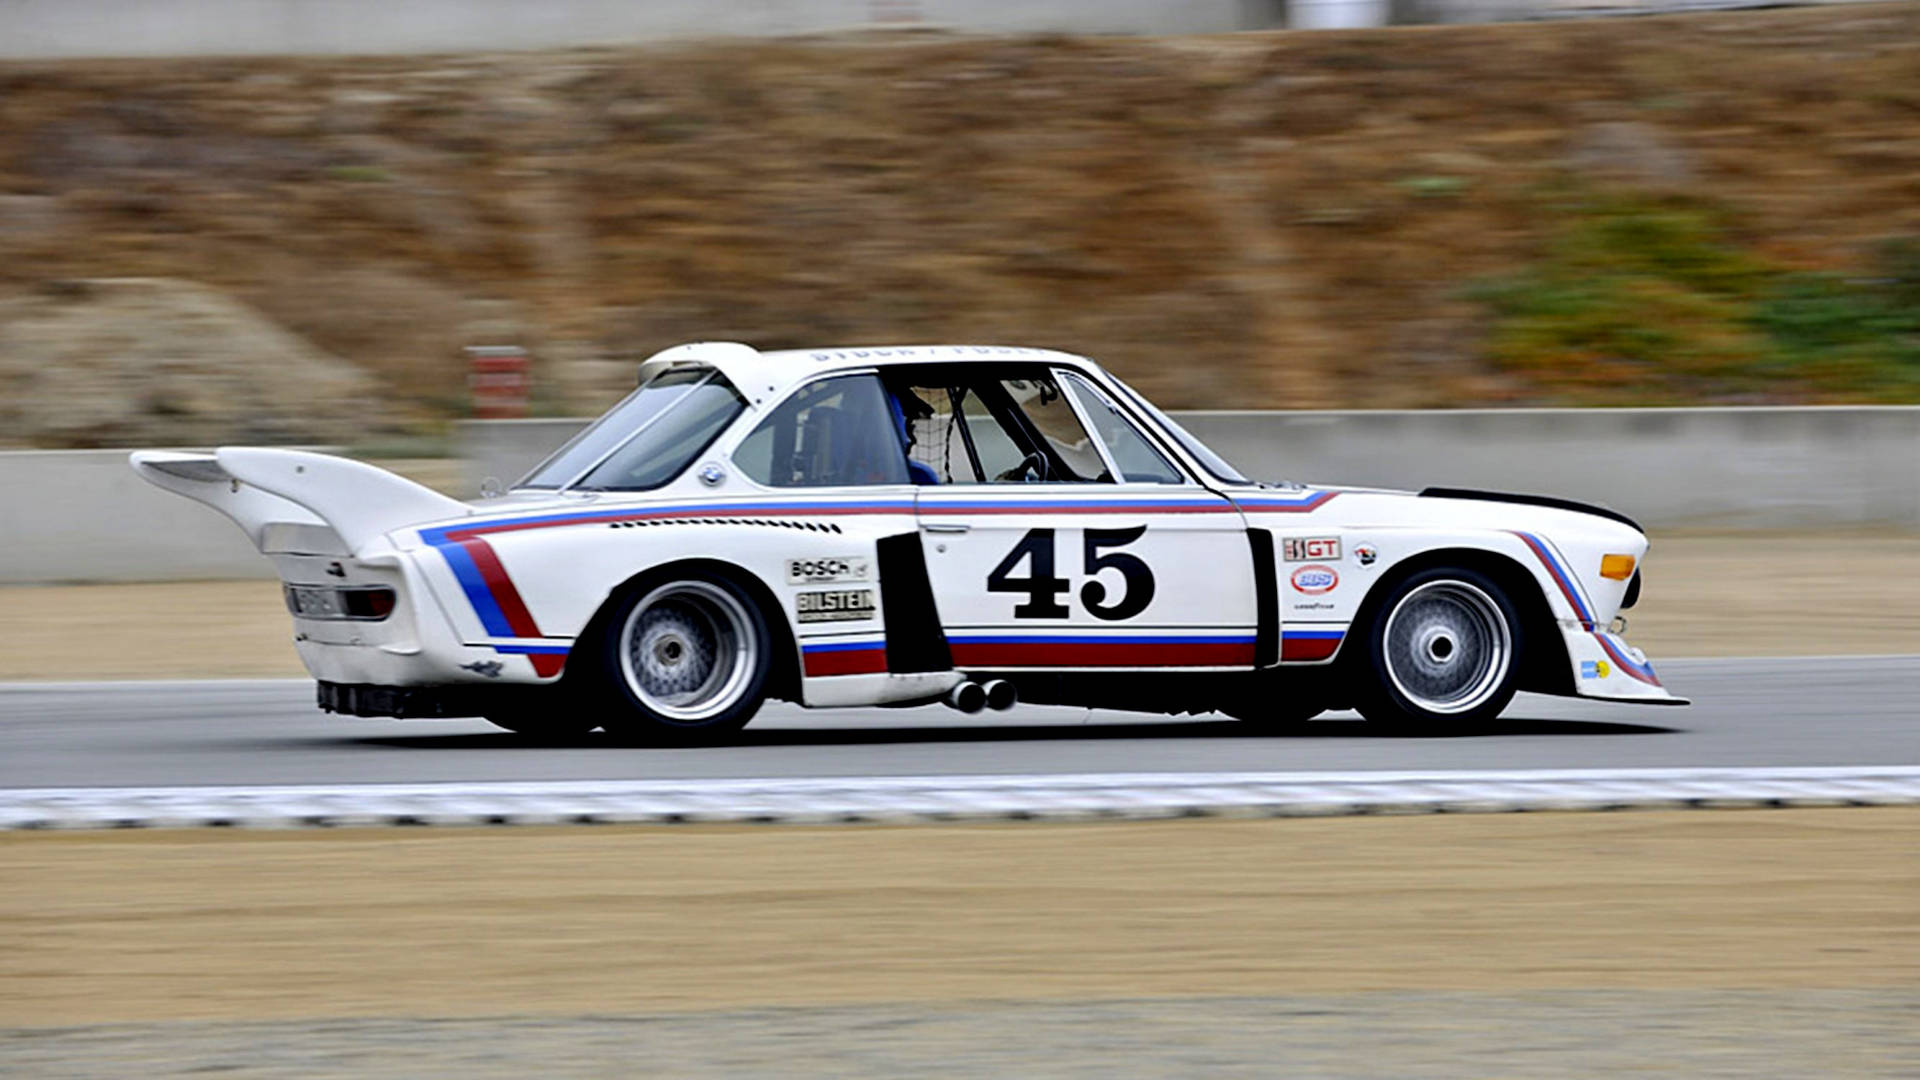 Racing Classic Bmw Background